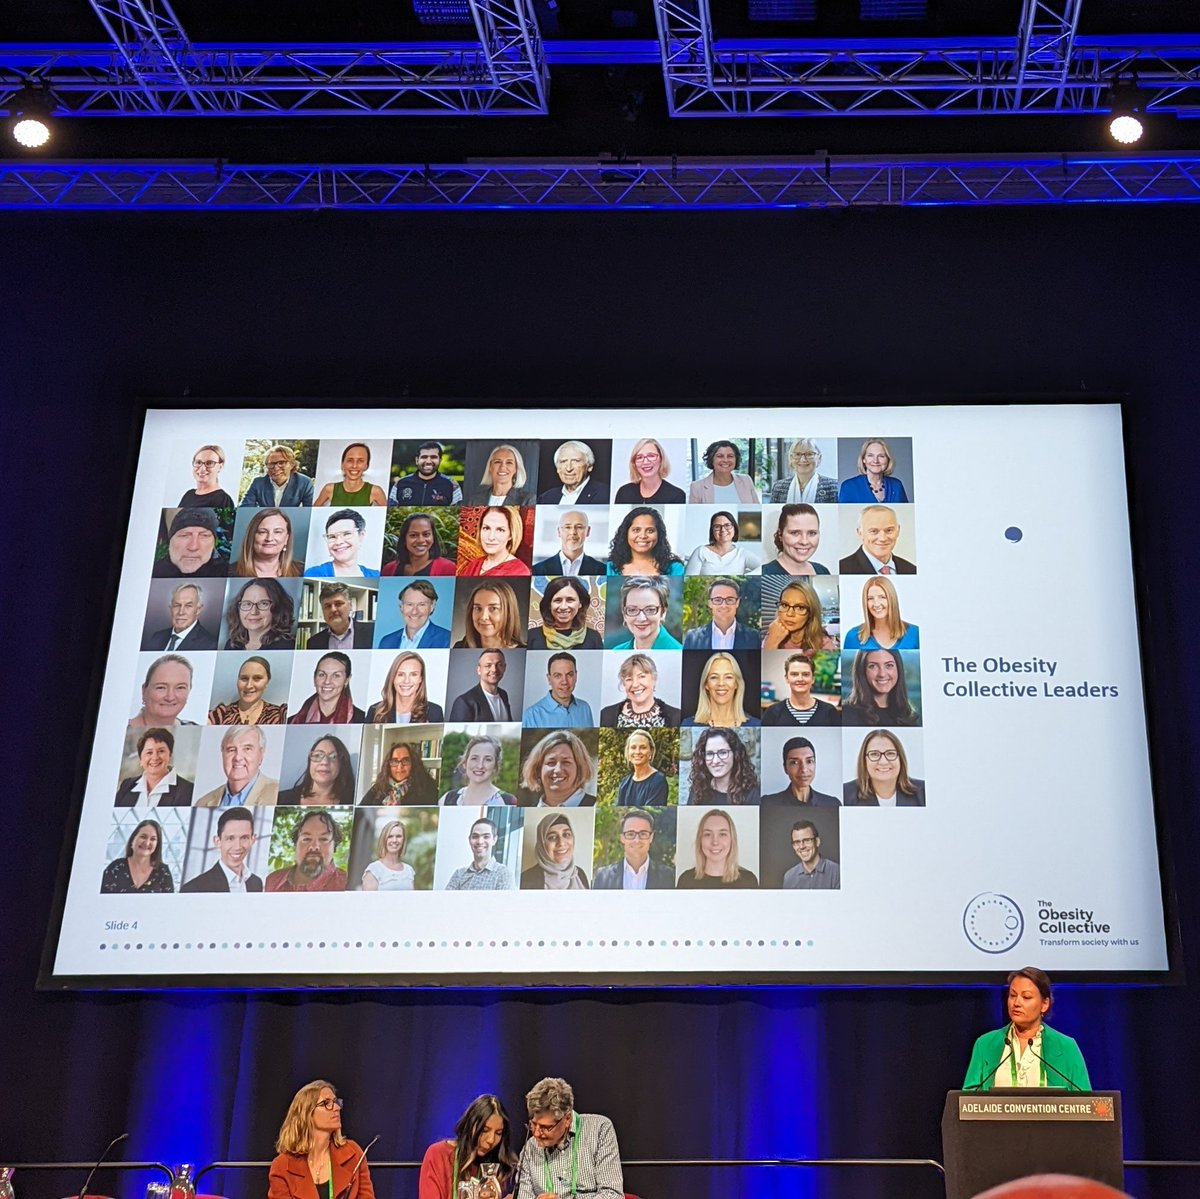 Our director representing The Obesity Collective at #ANZOS2023 and speaking on 'changing how we talk about obesity'. @ANZOS_Society #ActiononObesity